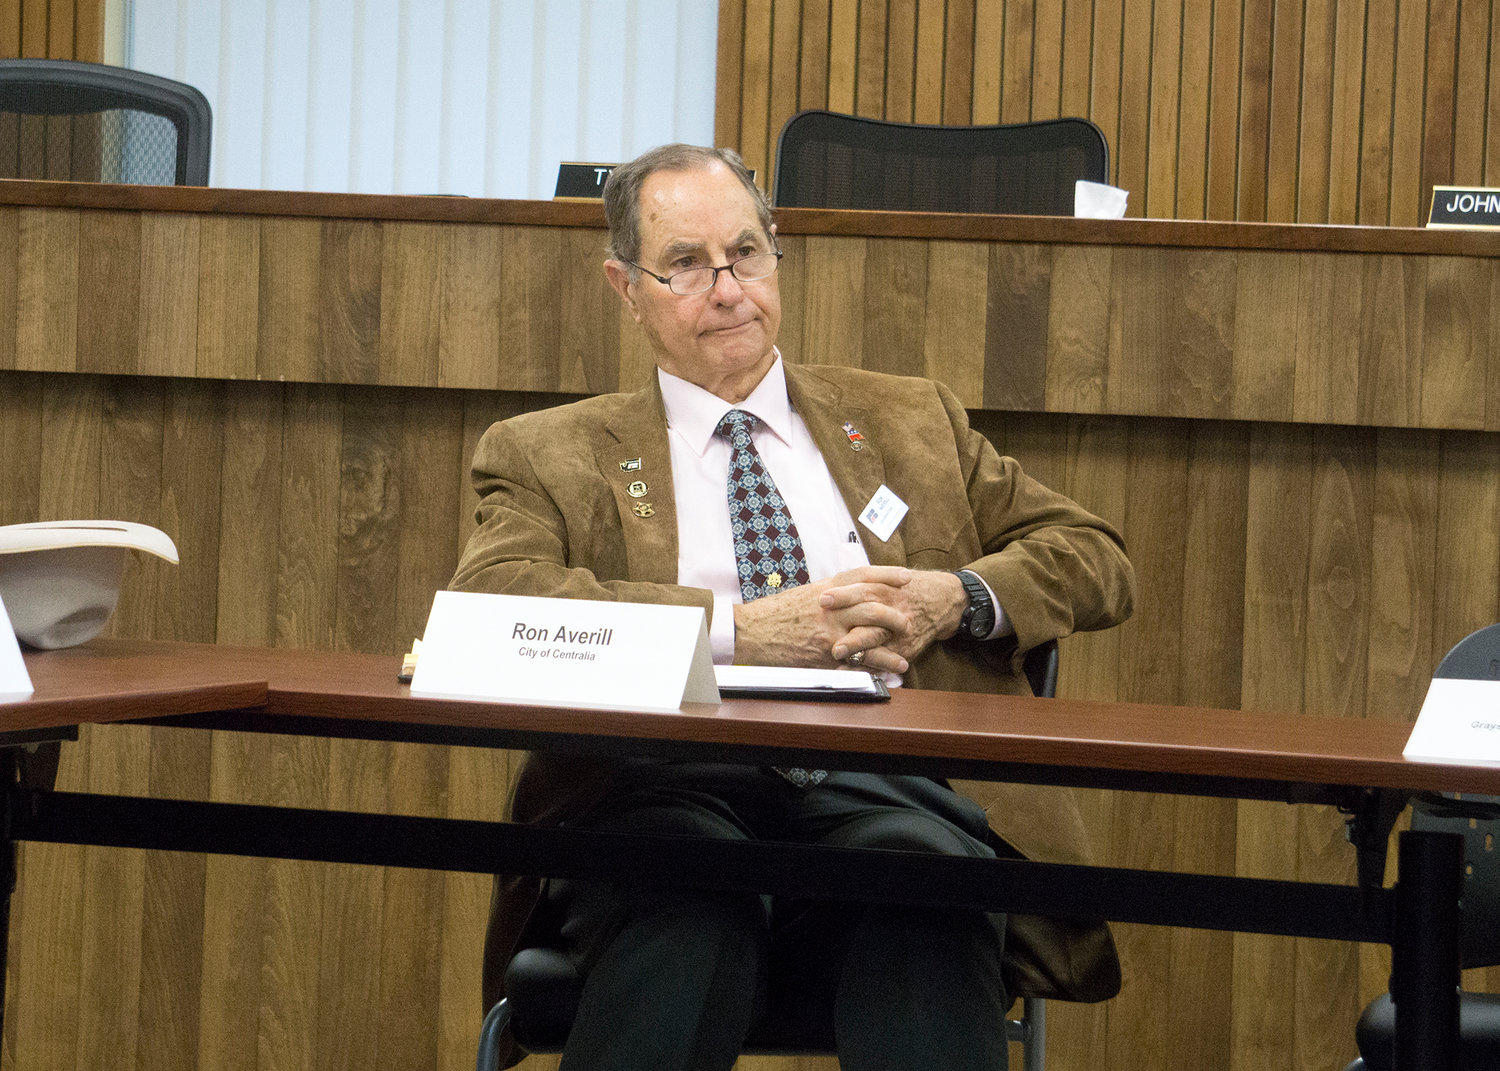 Ron Averill, representing the city of Centralia, listens during a meeting of the Chehalis River Basin Flood Authority Thursday afternoon in Olympia.